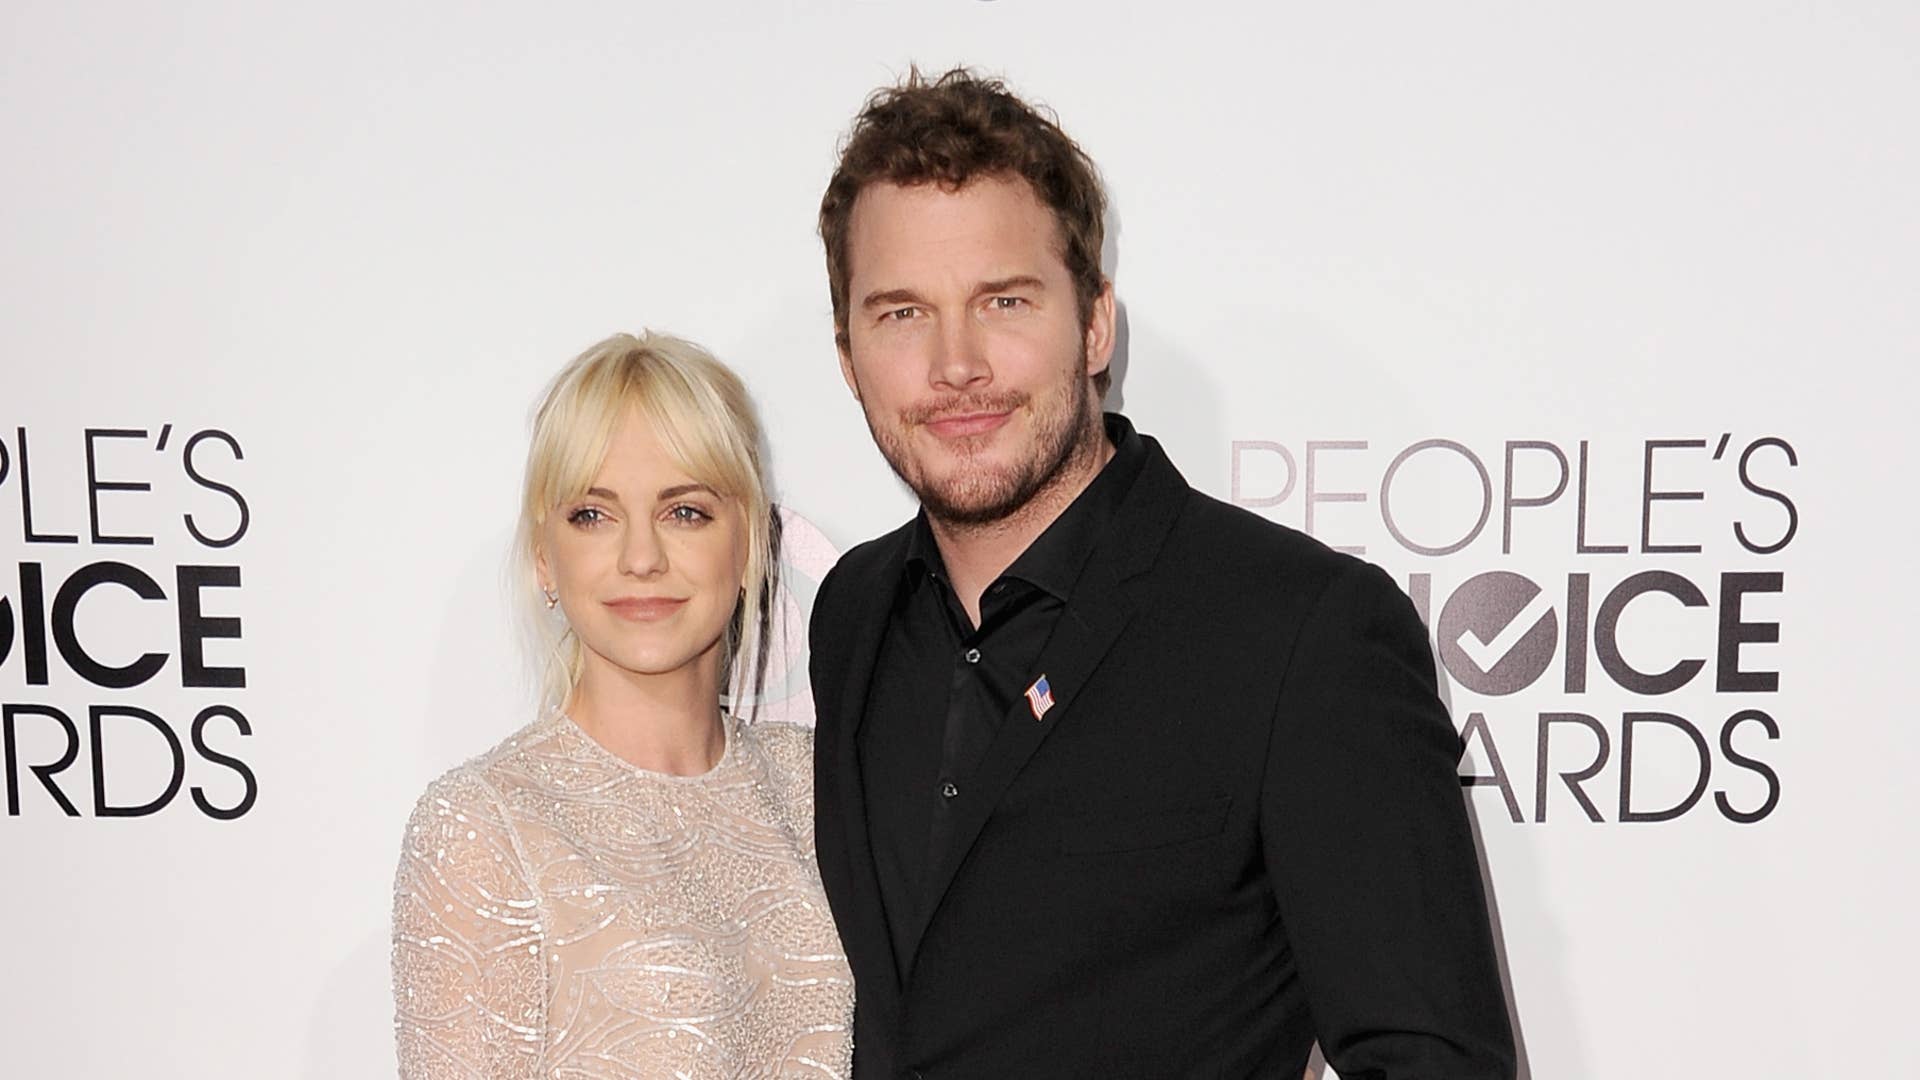 Anna Faris and Chris Pratt attend The 40th Annual People's Choice Awards.